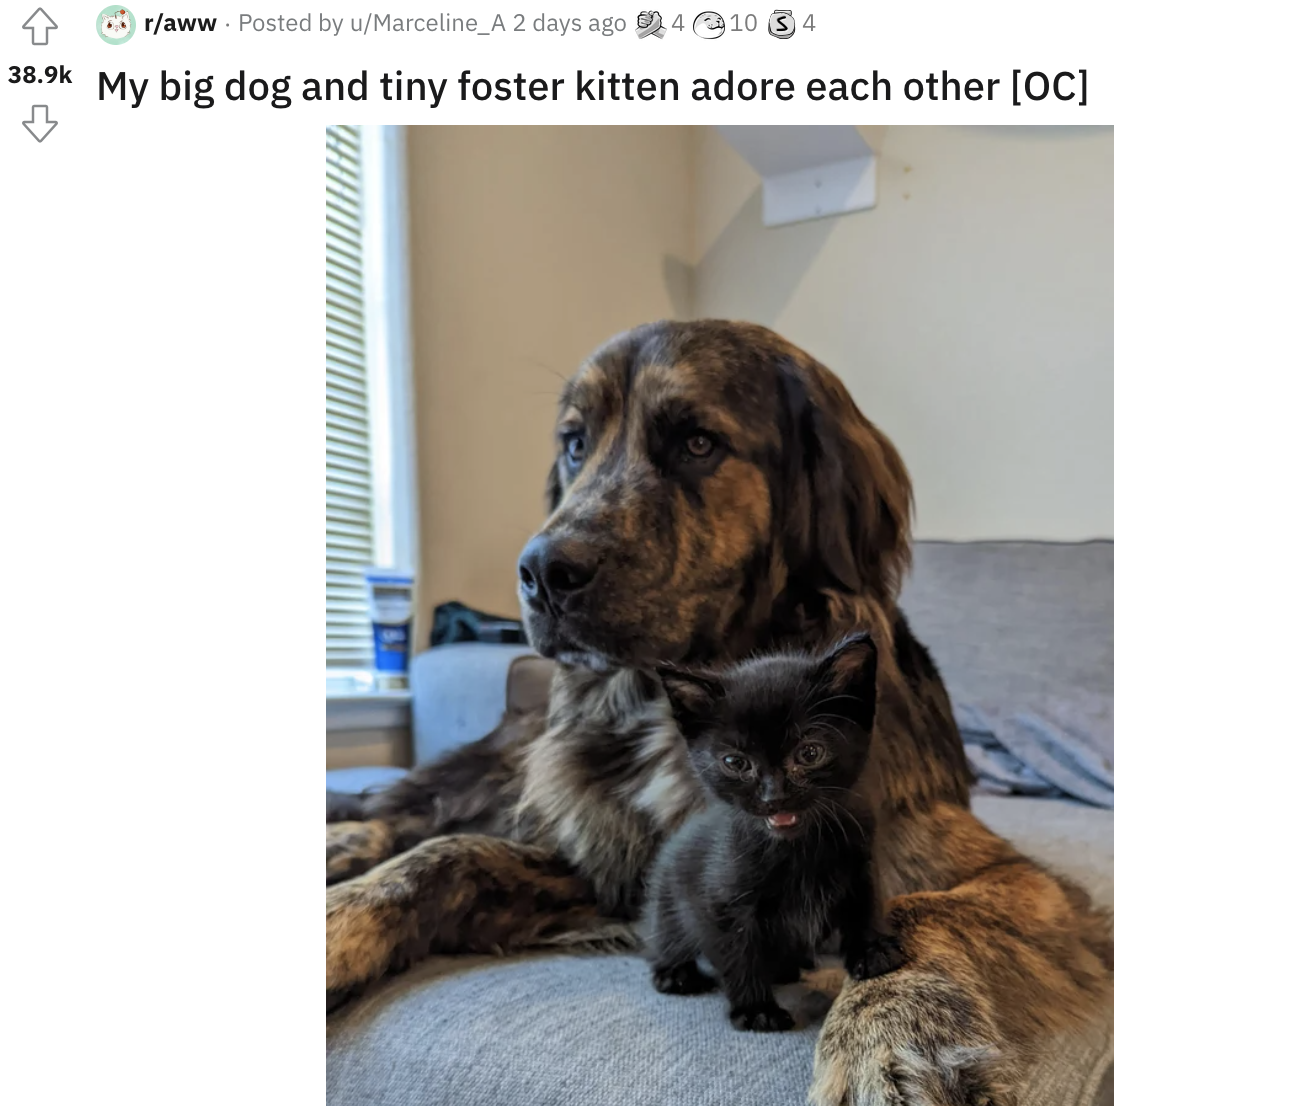 Big dog and tiny kitten sitting together, with text: My big dog and tiny foster kitten adore each other